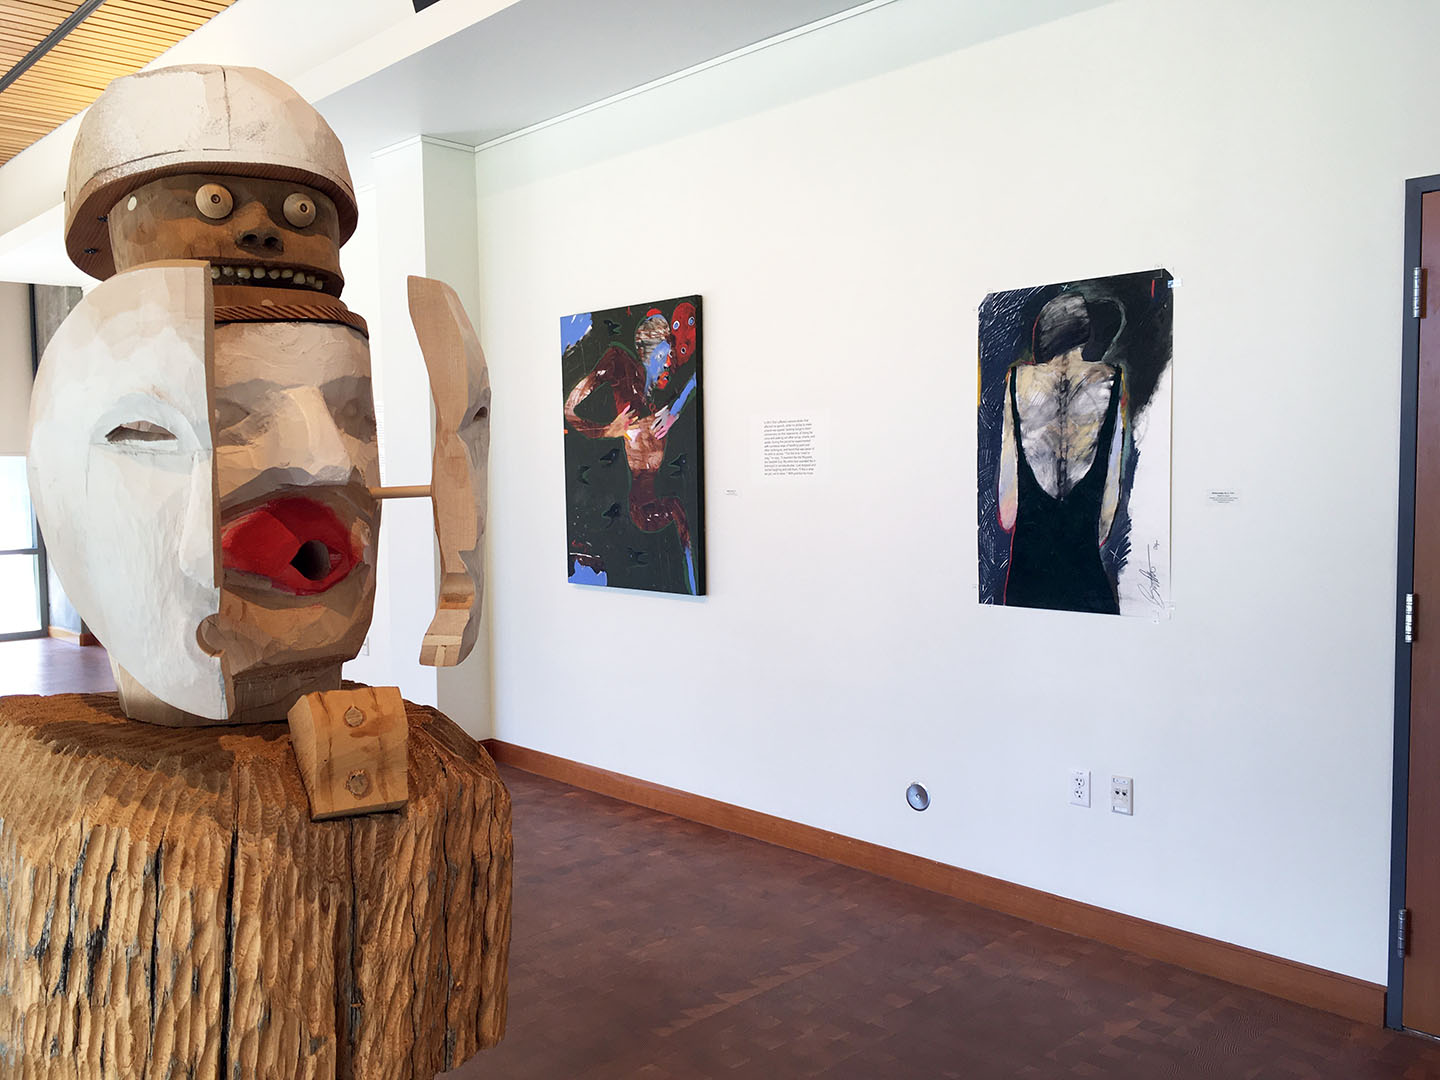 view of wooden sculpture in foreground with two faces opening to view a secondary face below with red lips and white face. white gallery walls behind with 2d artwork on them.